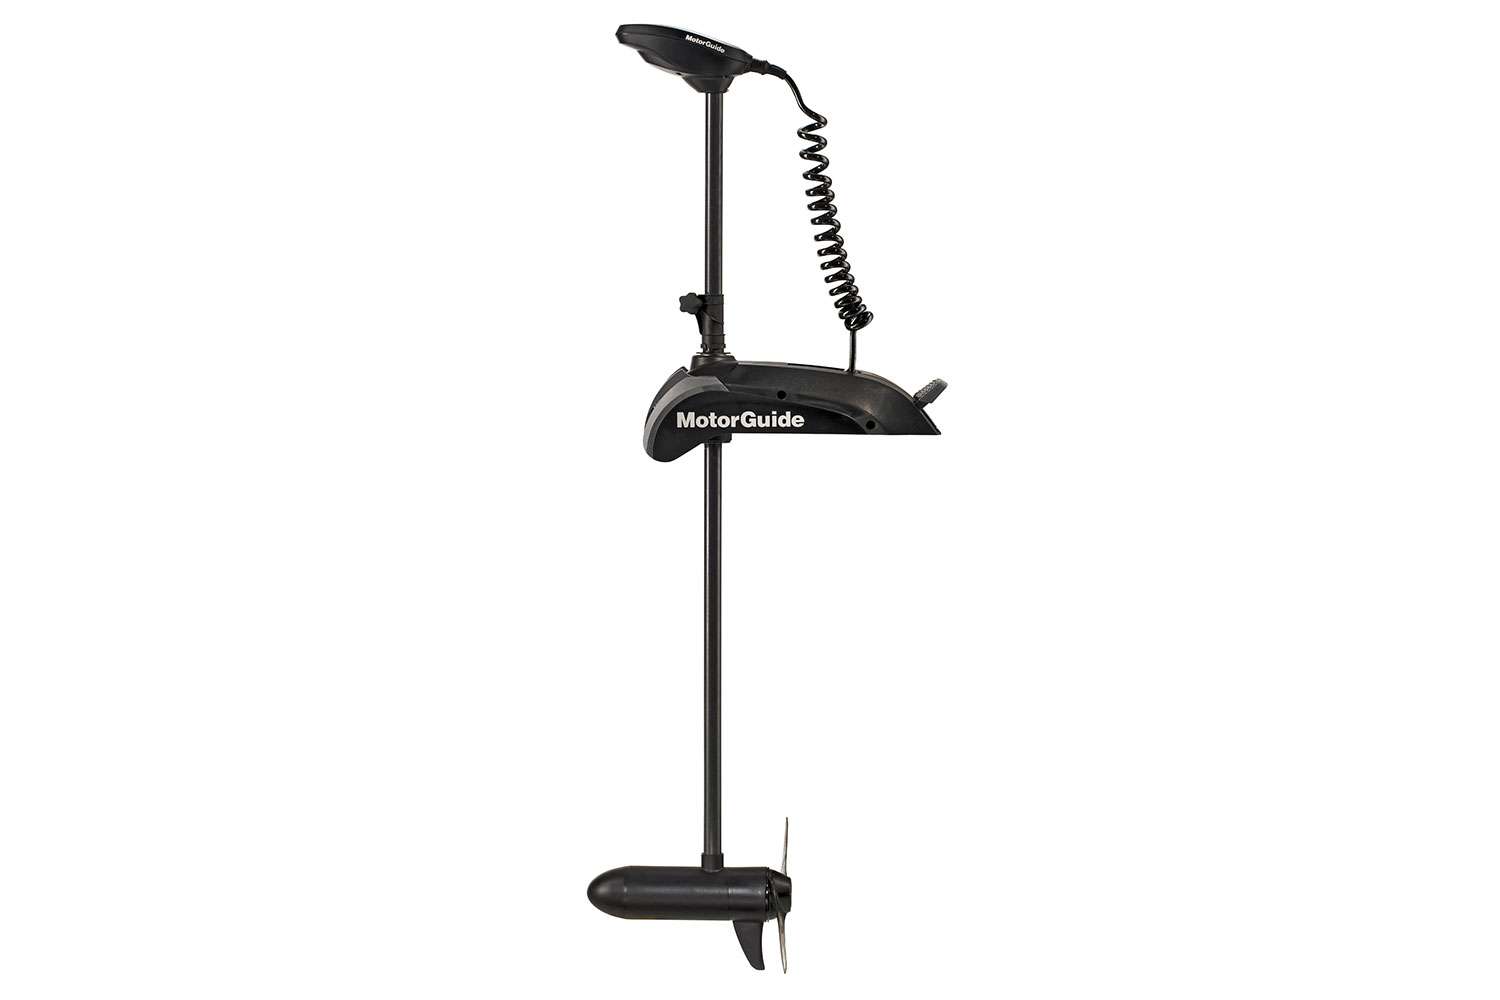 <p><b>MotorGuide Xi5 Wireless Trolling Motor with Sonar & Pinpoint GPS, $1,399.99</b></p> All Xi5 motors purchased at Bass Pro Shops and Cabela's starting 12/15/2018 now qualify for the 2019 MotorGuide $100 Cash Rebate. Visit MotorGuideRebate.com for more information.</p>  <p>MotorGuideâs Xi5 Wireless Trolling Motor with Sonar & Pinpoint GPS is the result of an extensive commitment to design, engineer, and manufacture best-in-class trolling motors for discerning anglers. Enjoy wireless capability right out of the box to command precise motor and steering control from anywhere in the boat.</p>   <p>Xi5 is stealthy quiet, silky smooth and durable. Xi5 features universal integrated sonar utilizing Lowrance 83/200kHz transducers with a pre-installed Lowrance 7-pin connector. PinPoint GPS technology takes boat control to the next level with an ultra-precise receiver and two digital compasses for best-in-class accuracy.<br> <a href=